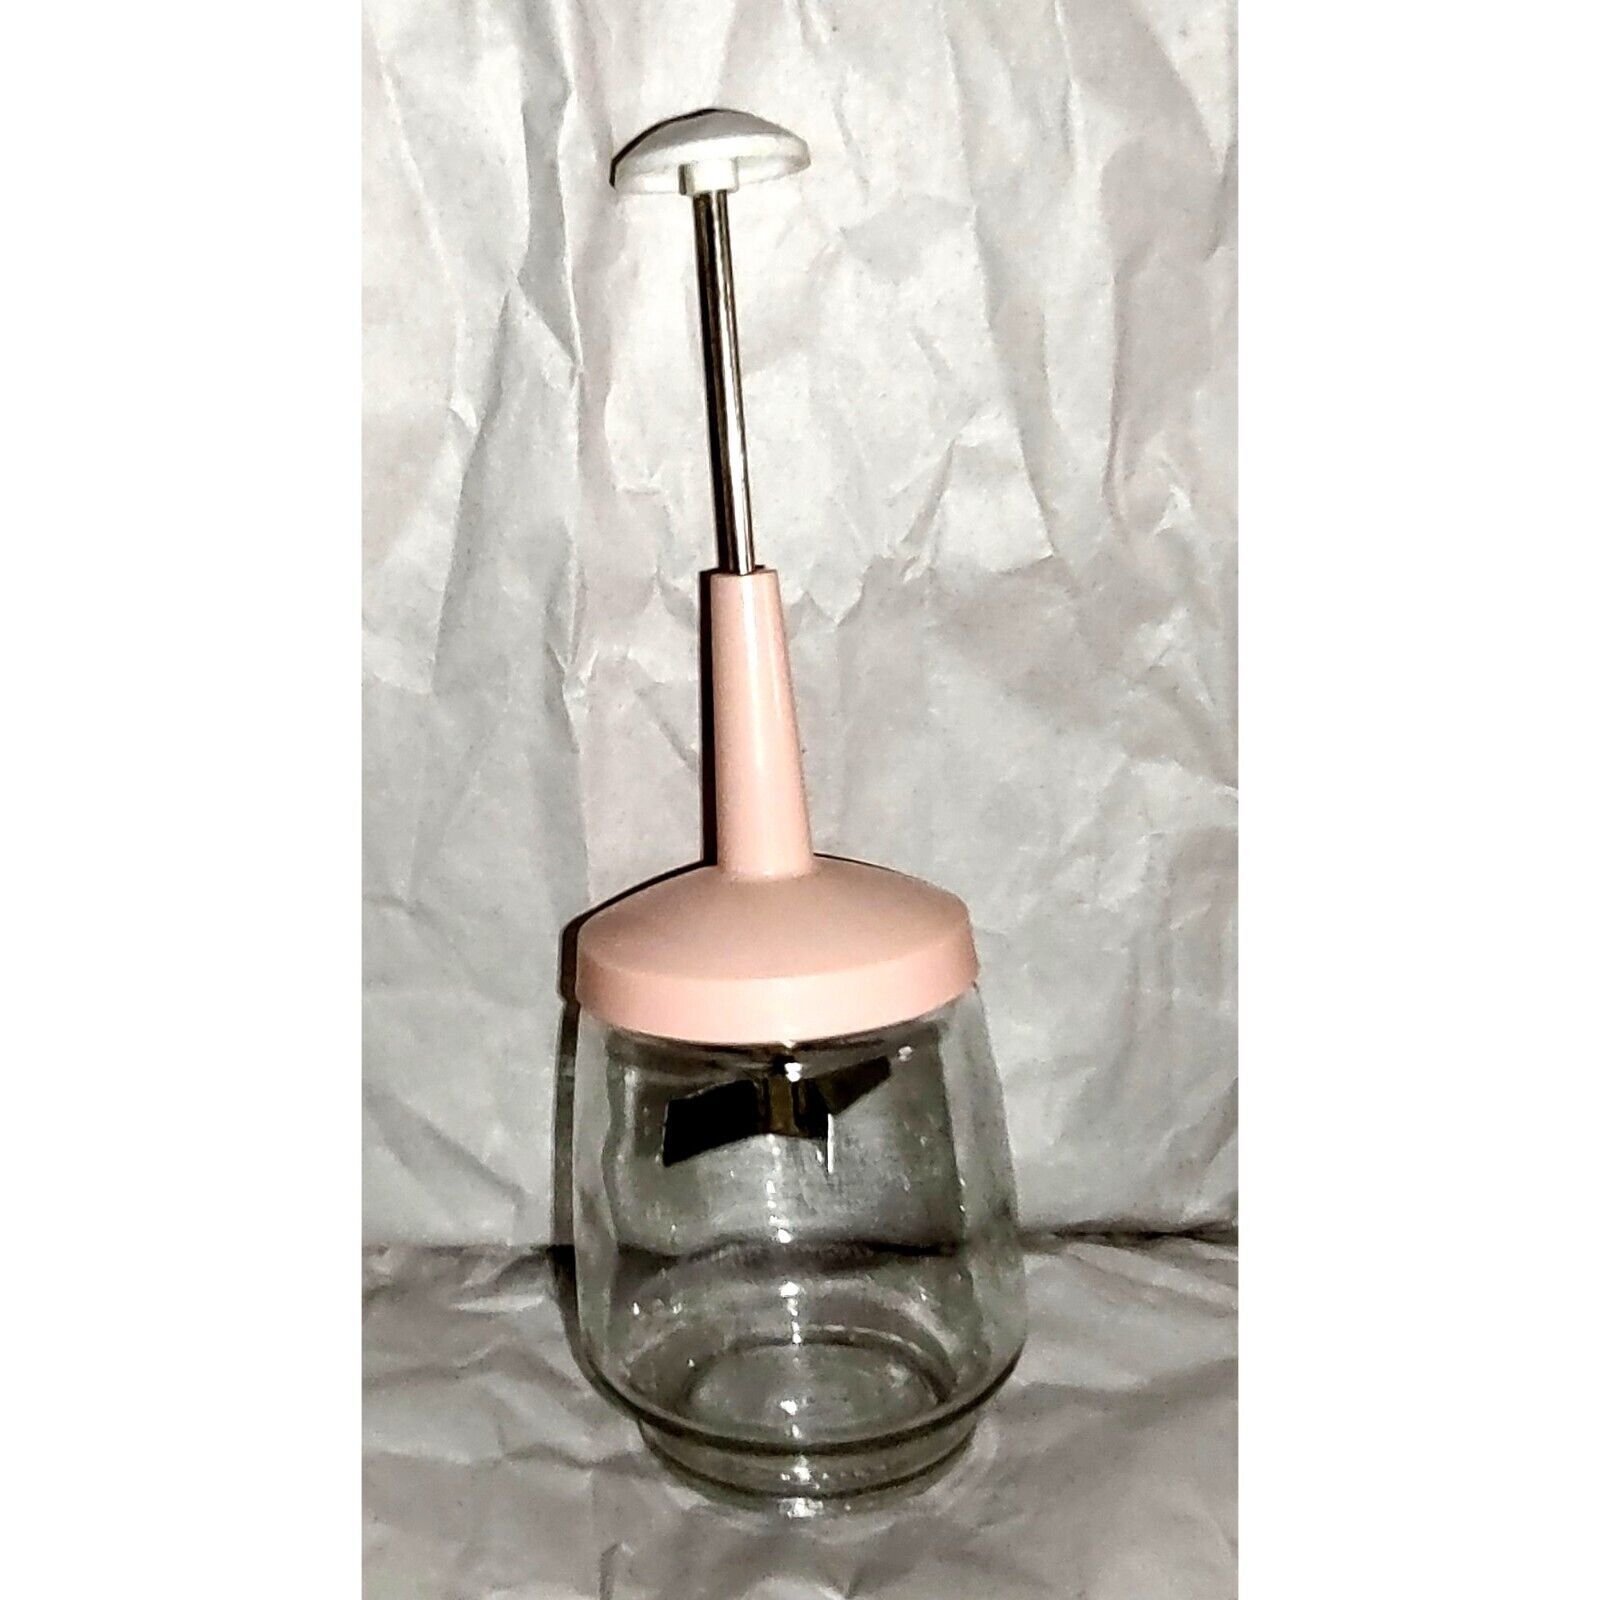 1950s Vegetable Onion Chopper Pink Plastic Top Federal Glass Bottom Works MCM - $24.70